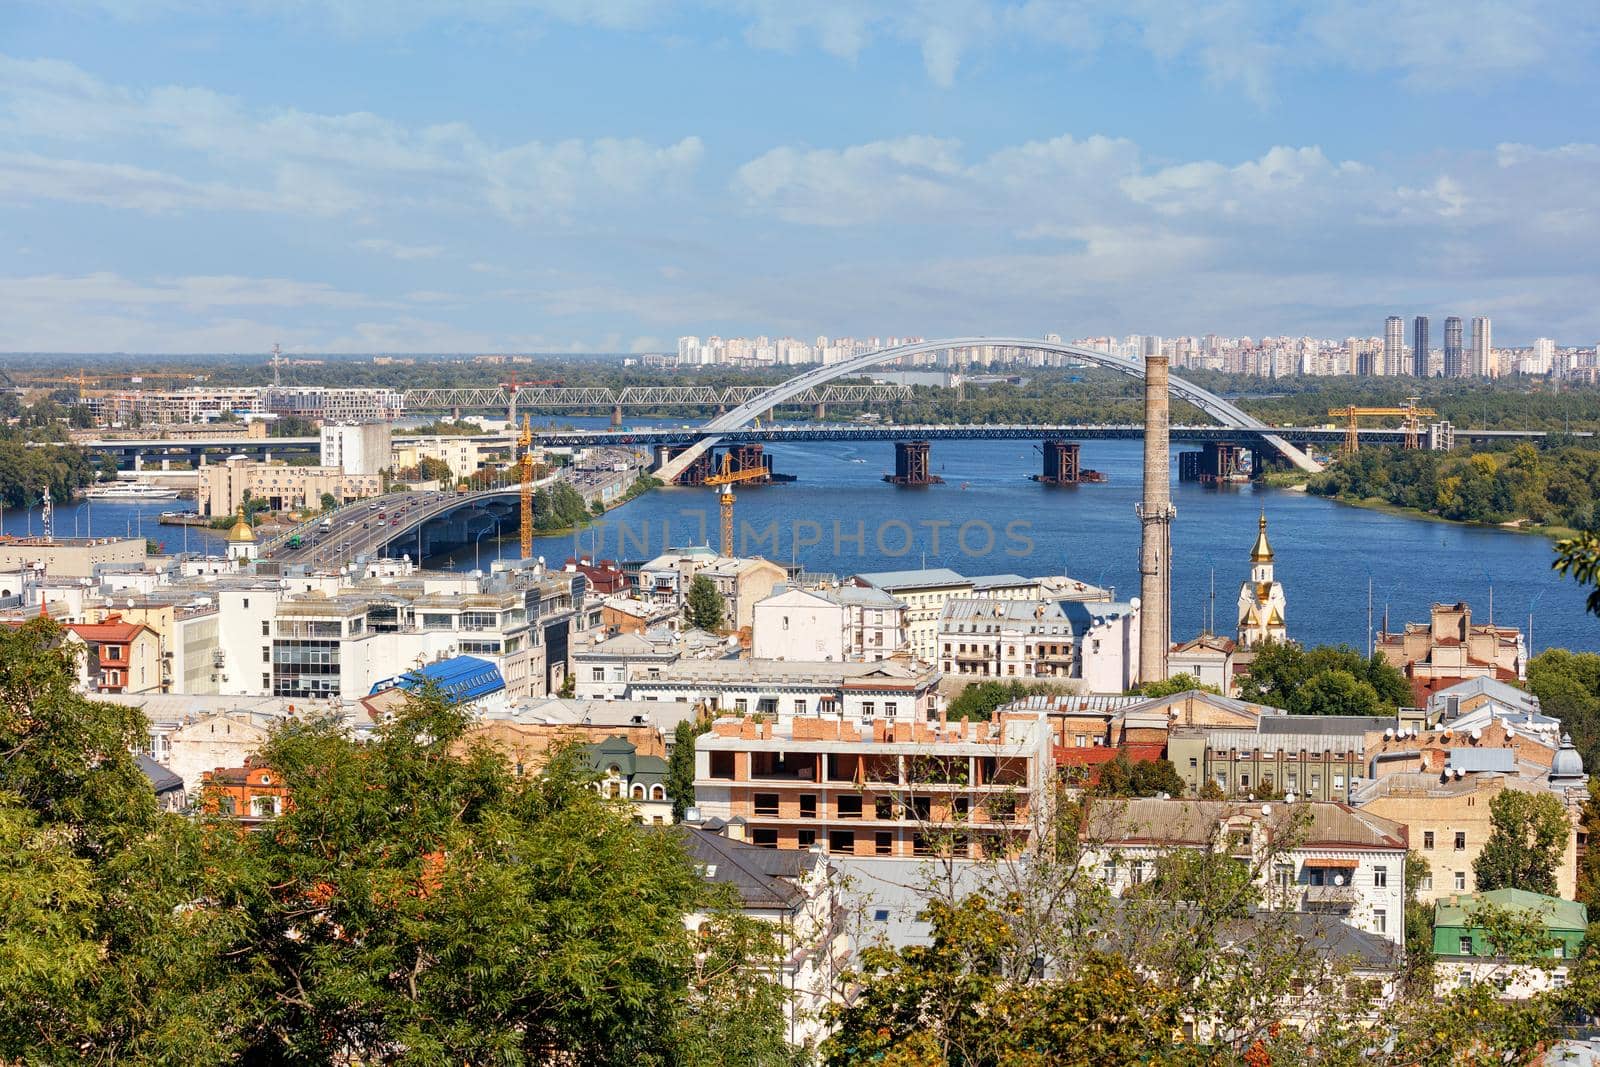 The landscape of summer Kyiv with a view of the old district of Podil with road and railway bridges, a chimney of an old boiler room and a bell tower with a gilded dome, the Dnipro River and many city buildings. by Sergii